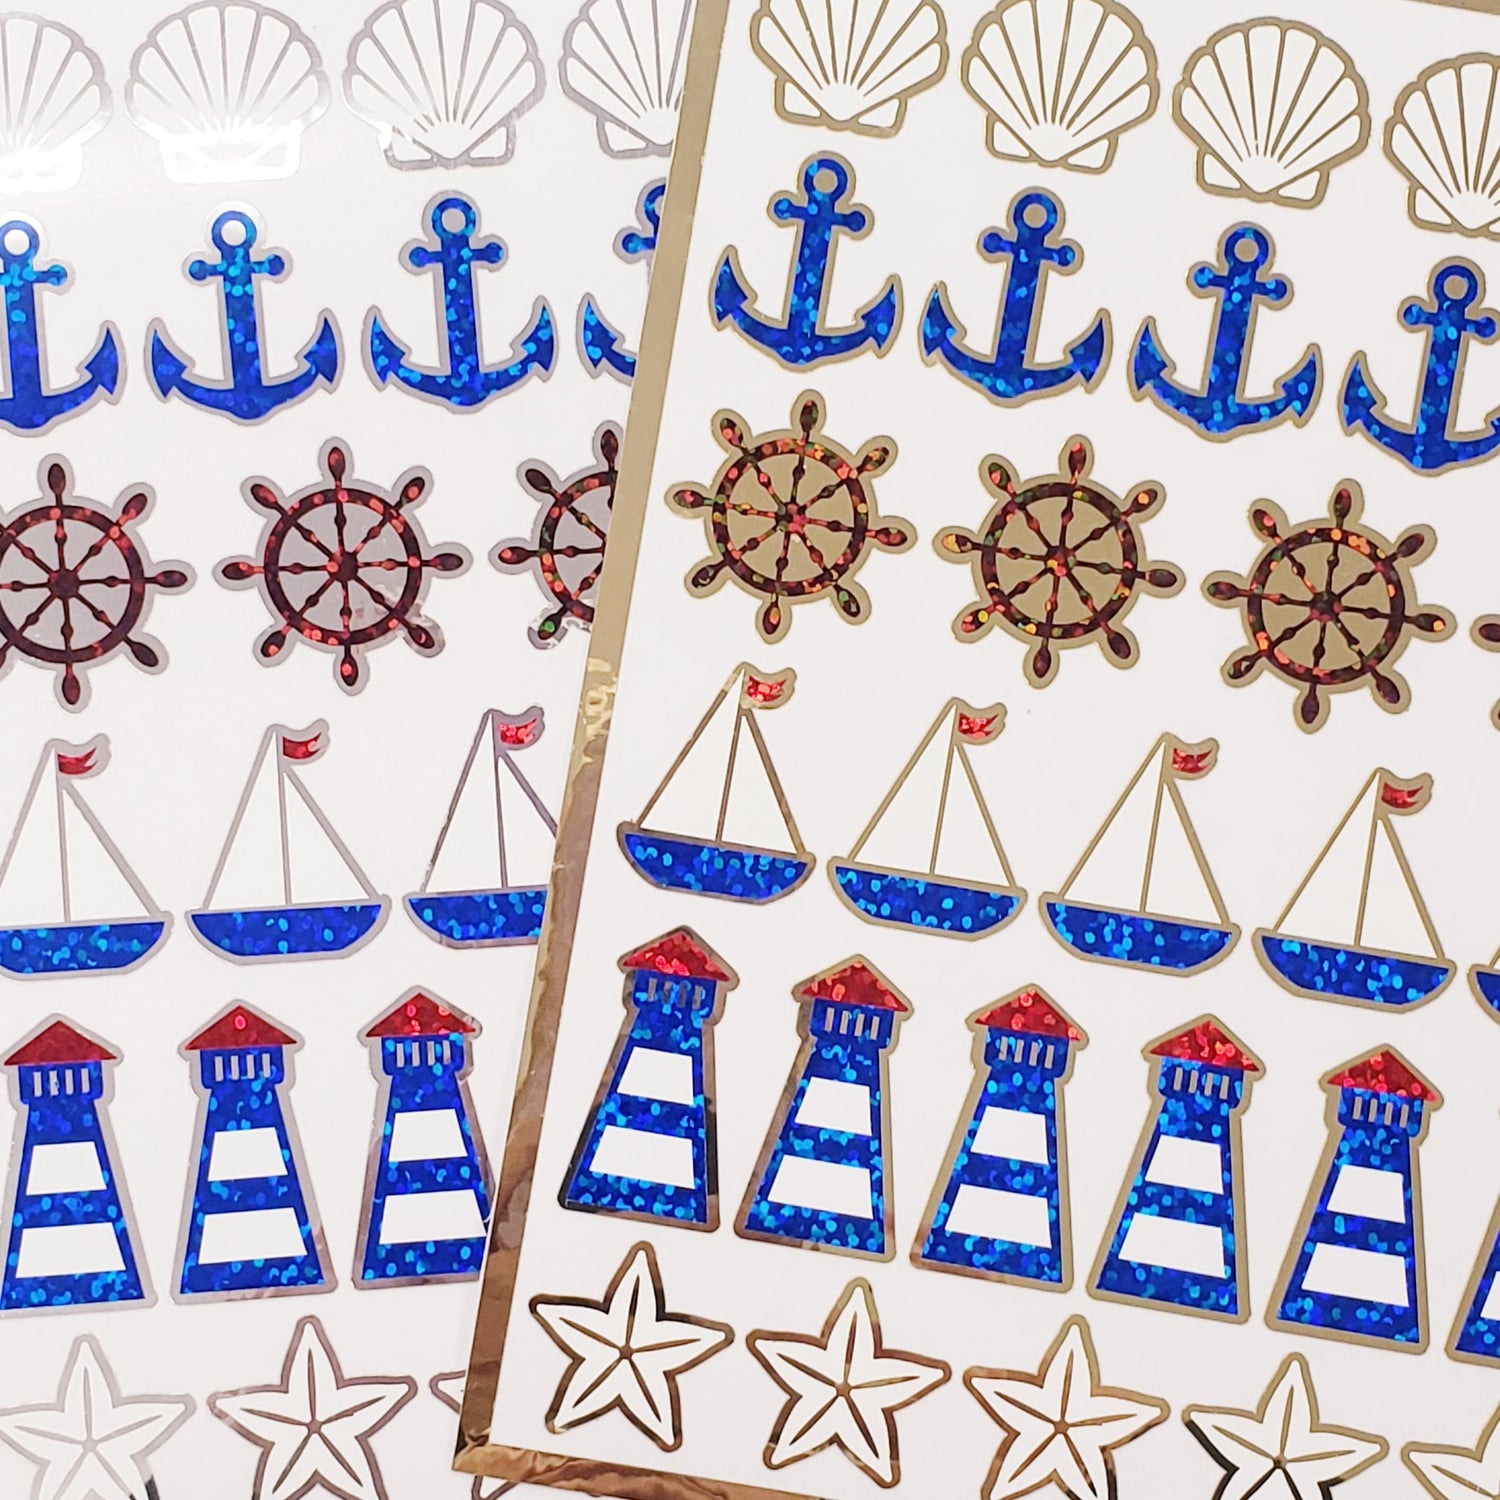 Nautical Glitter Stickers, set of 30 sailboats, anchors, lighthouses and seashells for journal, scrapbooks, beach weddings and pool party.